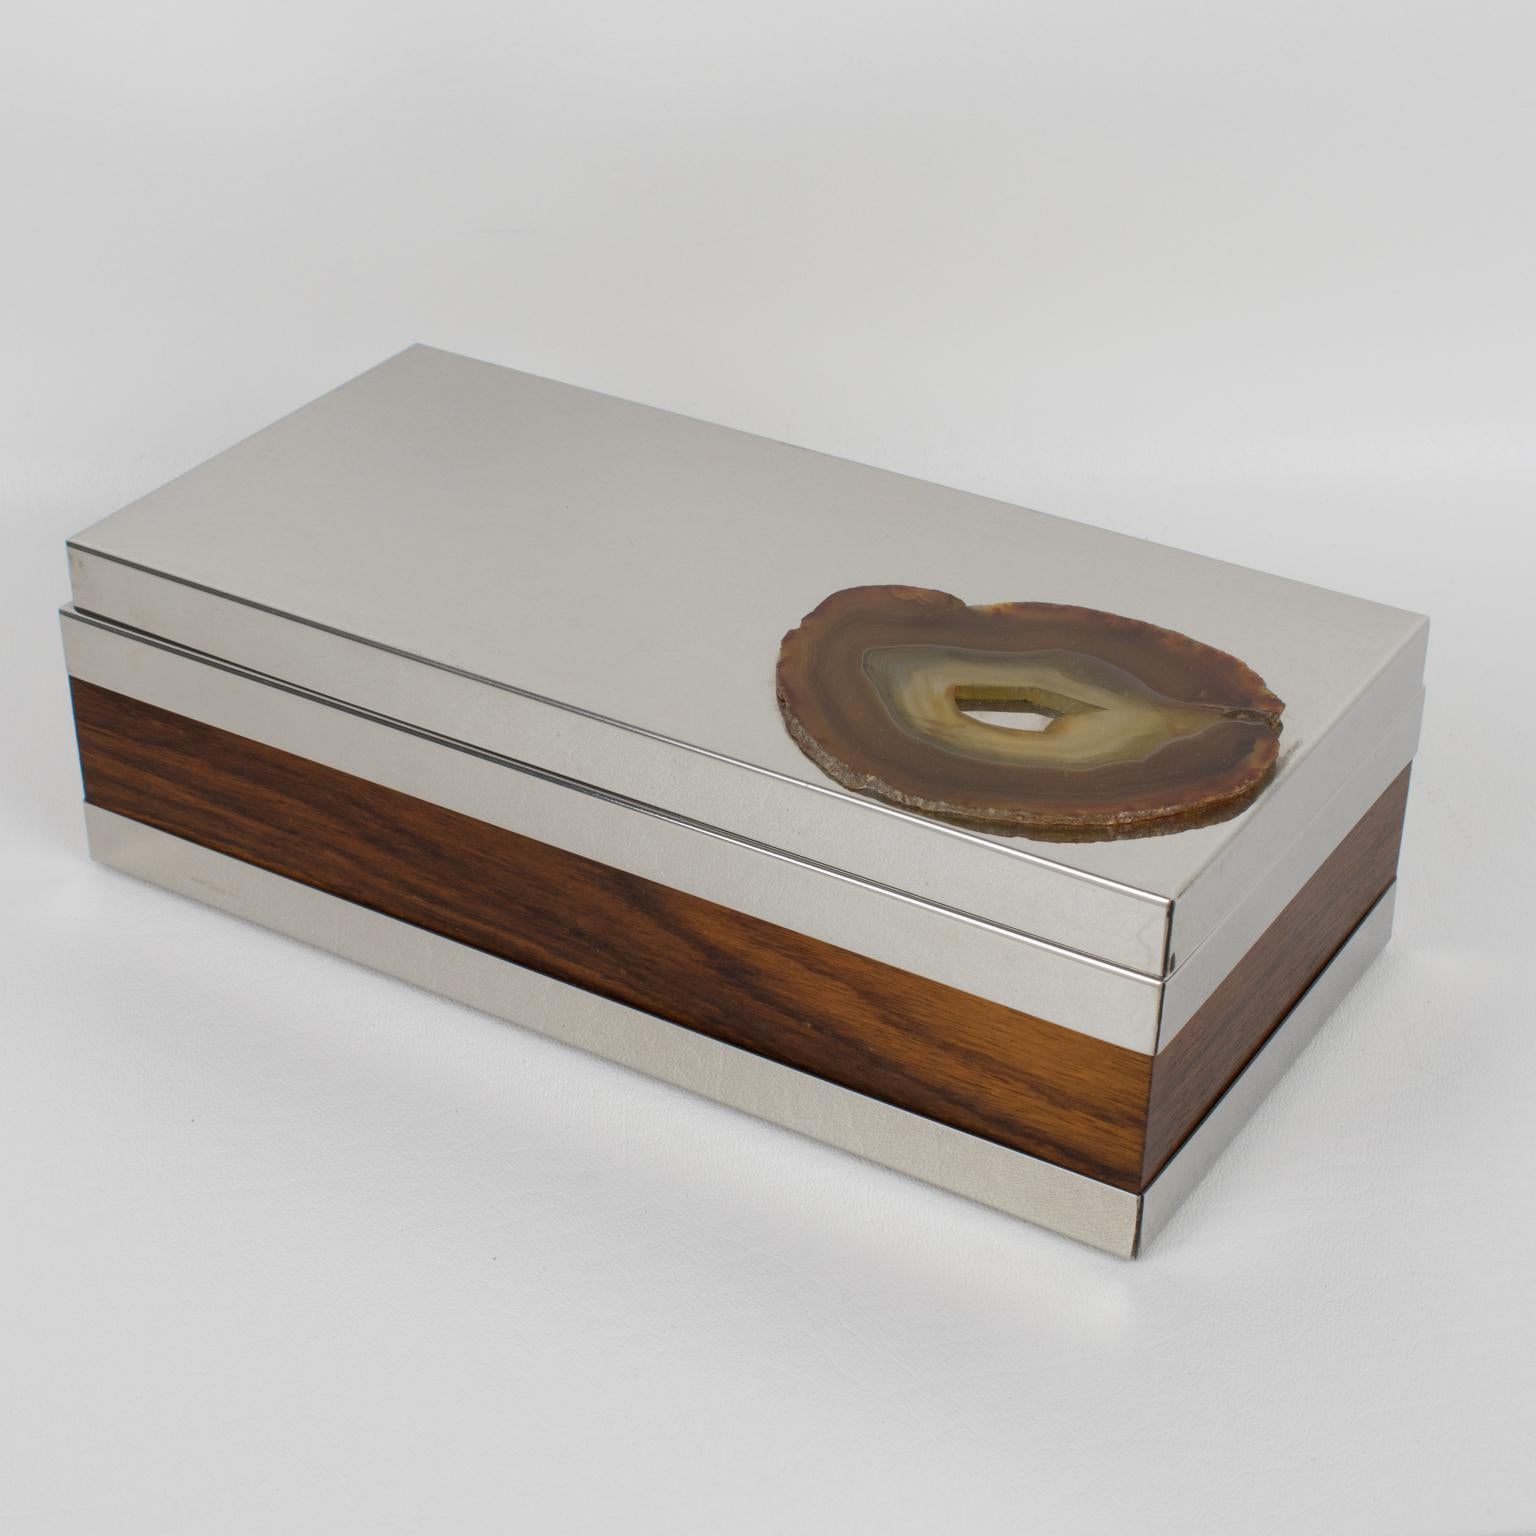 Silver Plate and Wood Box with Agate Stone Slab Decor, Italy 1980s For Sale 2